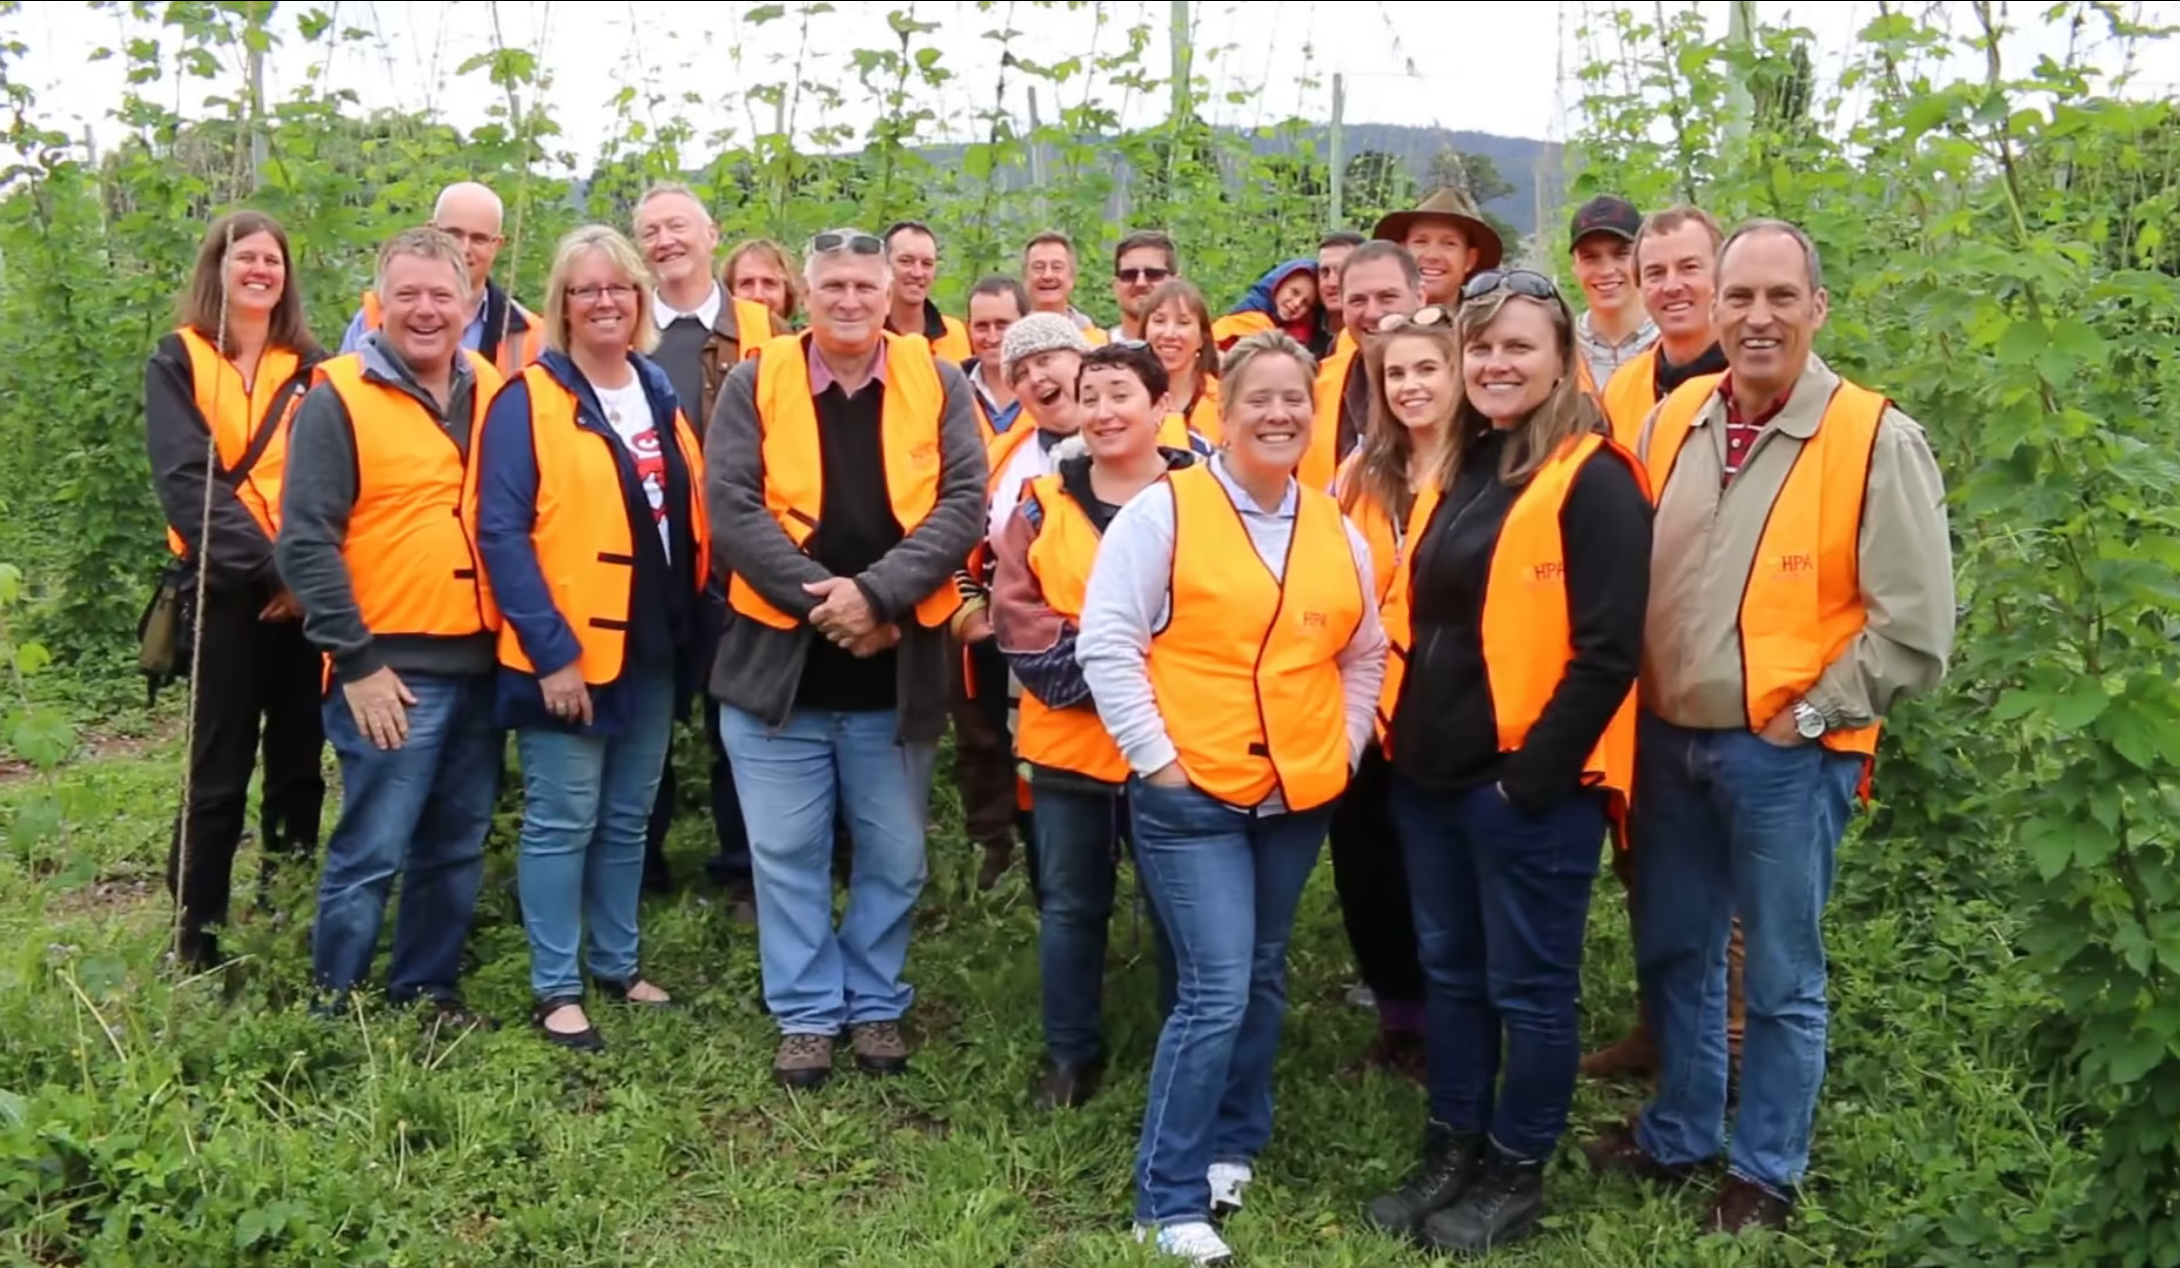 The Horticulture Innovation Australia-backed University of Tasmania course is now in its fifth year. Apply now to join the 2022 cohort.